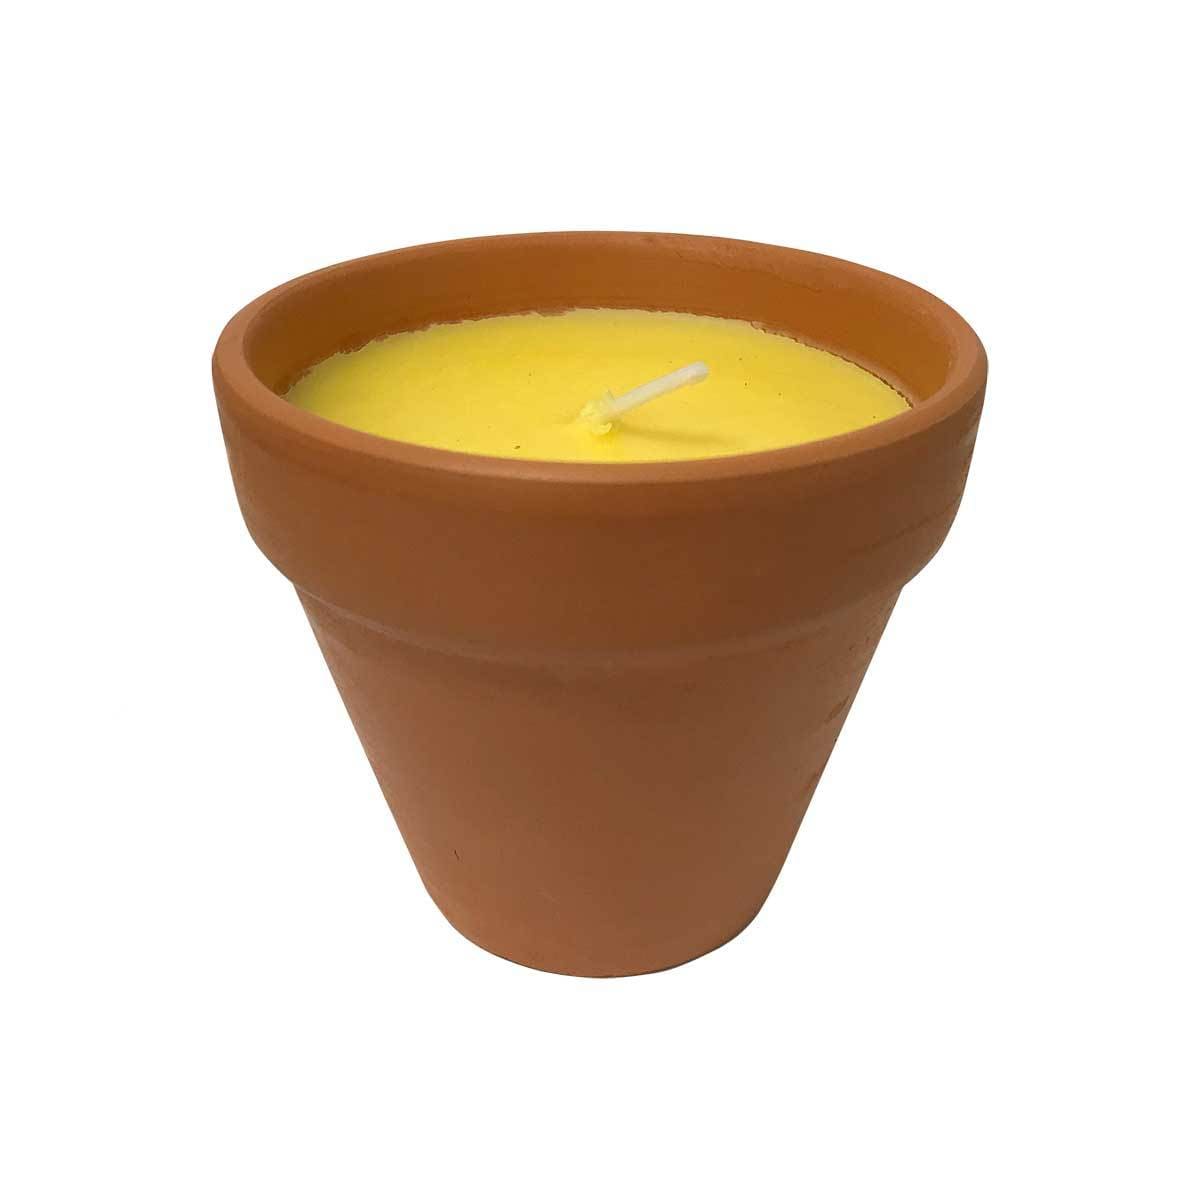 Peppermint Citronella Infused Candle In a Terracotta Pot Prepack of 12